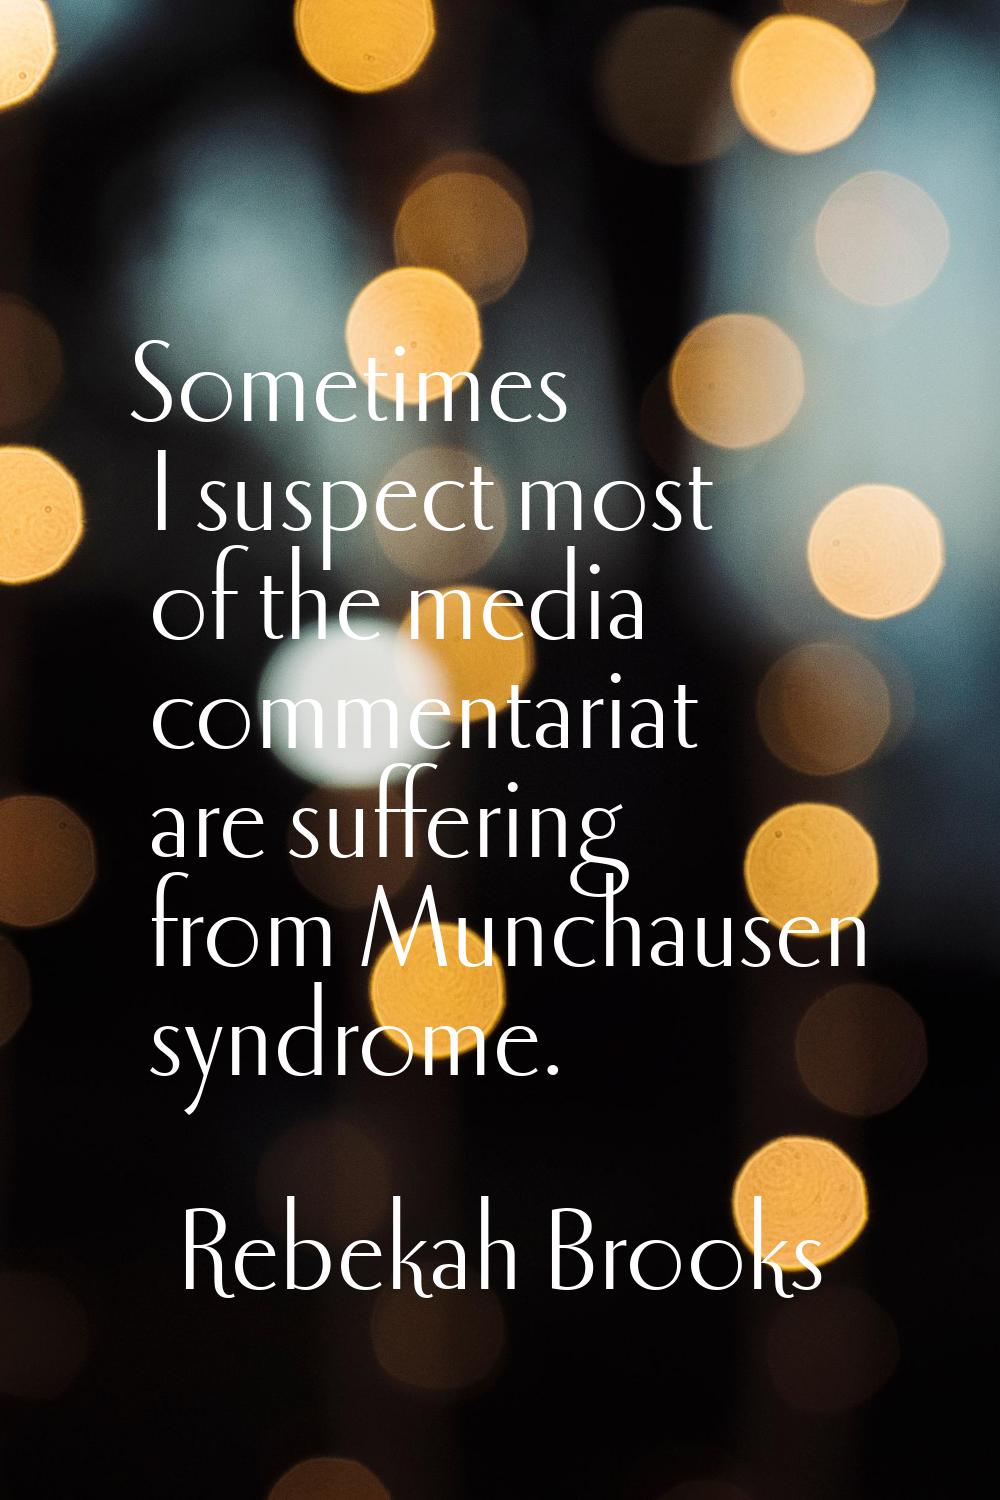 Sometimes I suspect most of the media commentariat are suffering from Munchausen syndrome.